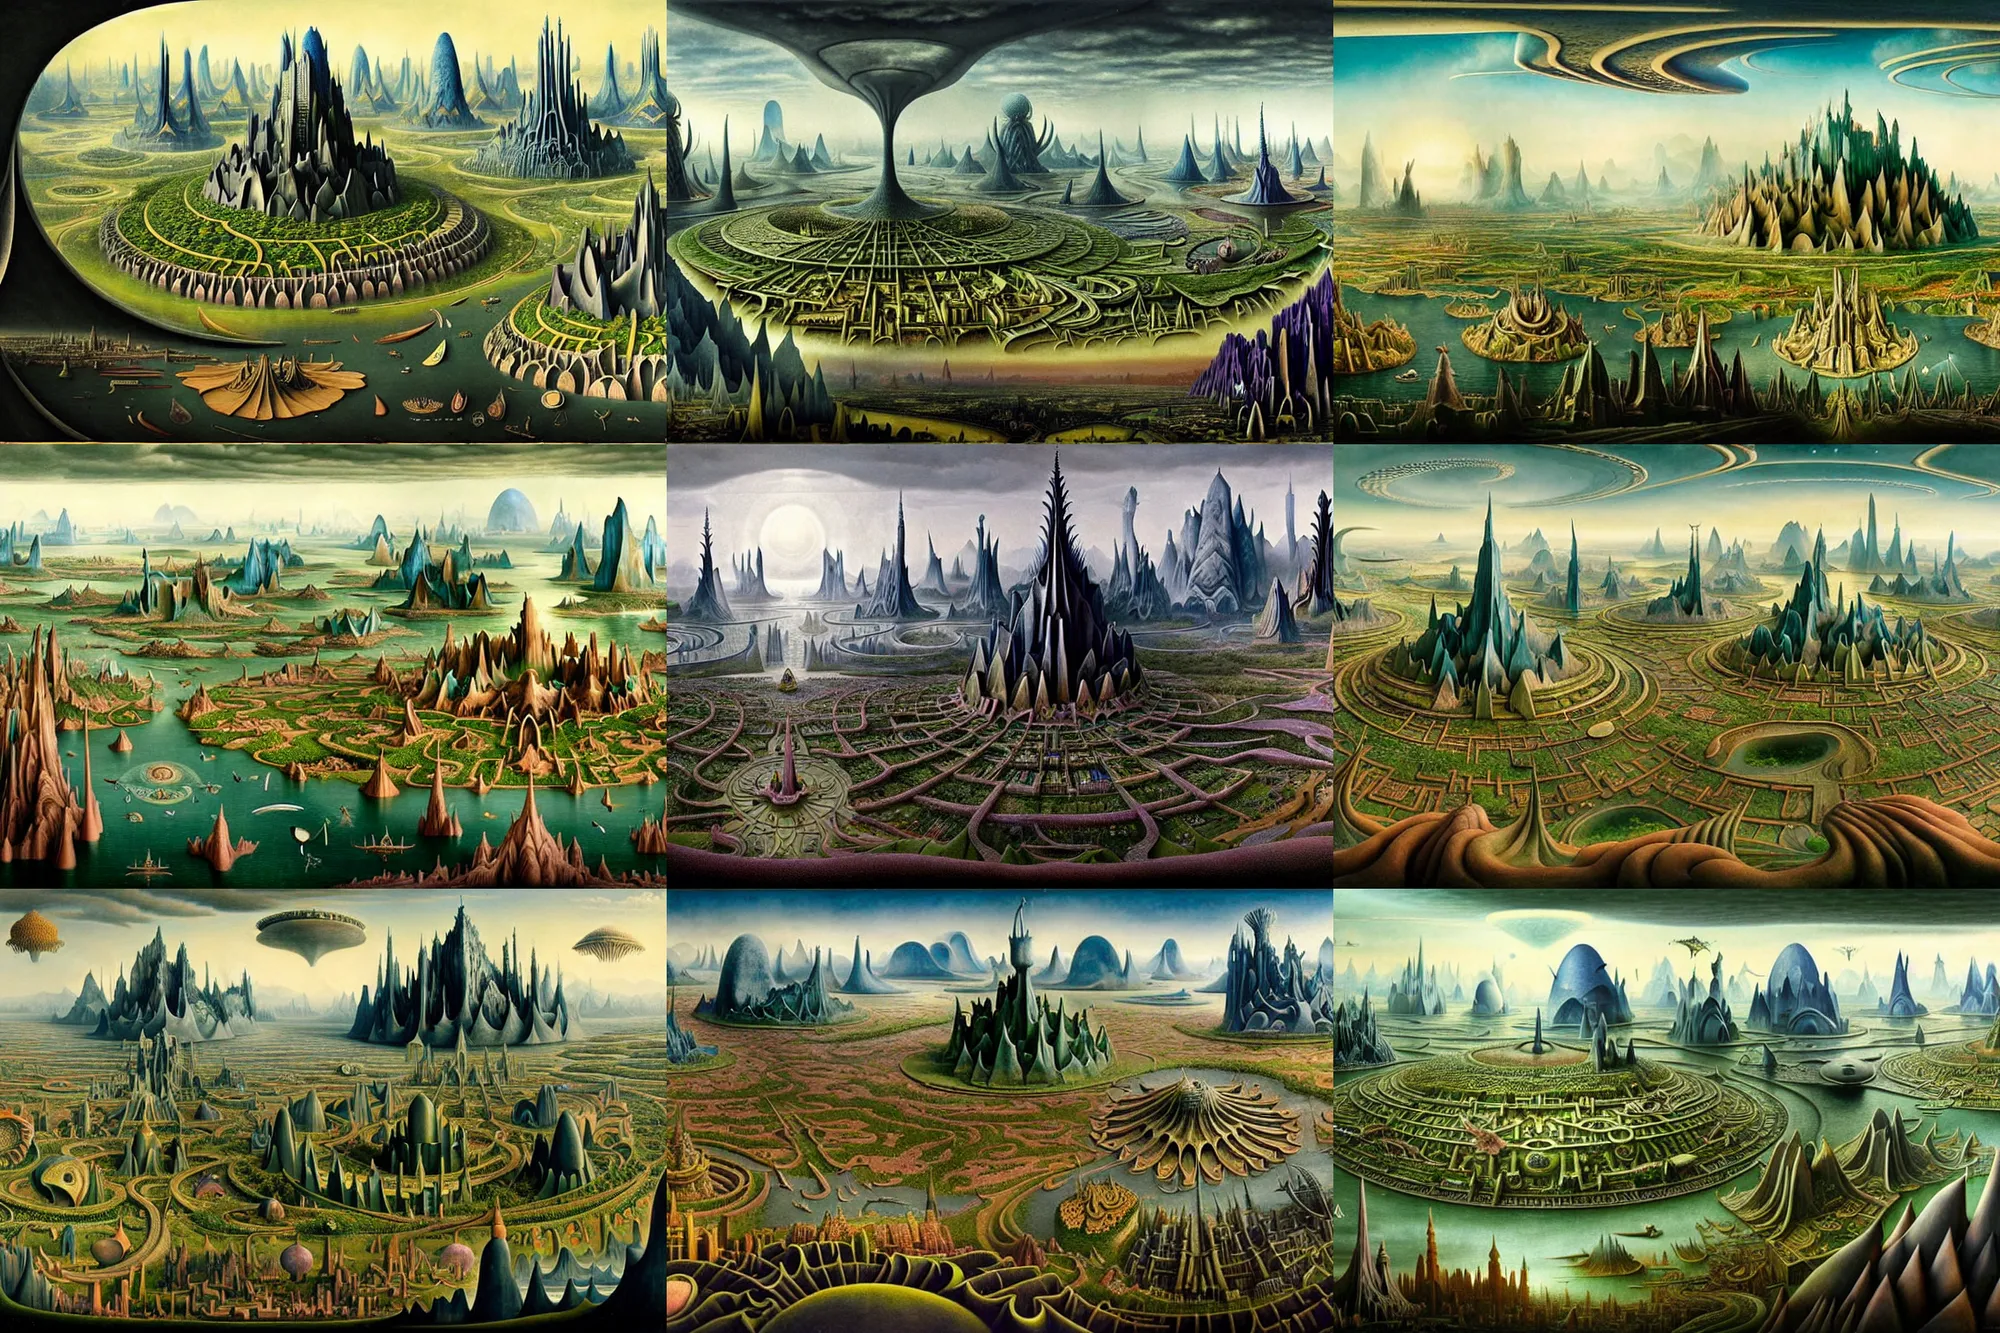 Prompt: a beautiful and insanely detailed matte painting of an advanced sprawling civilization with surreal architecture designed by Heironymous Bosch, mega structures inspired by Heironymous Bosch's Garden of Earthly Delights, a beautiful and insanely detailed matte painting of an advanced sprawling civilization with surreal architecture designed by Heironymous Bosch, mega structures inspired by Heironymous Bosch's Garden of Earthly Delights, a beautiful and insanely detailed matte painting of an advanced sprawling civilization with surreal architecture designed by Heironymous Bosch, mega structures inspired by Heironymous Bosch's Garden of Earthly Delights, ships of the air and sea designed by Heironymous Bosch and Jim Burns, vast surreal landscape and horizon by Jim Burns and Tyler Edlin, vast surreal landscape and horizon by Jim Burns and Tyler Edlin, masterpiece!!, grand!, imaginative!!!, whimsical!!, epic scale, intricate details, sense of awe, elite, complex layered composition!!